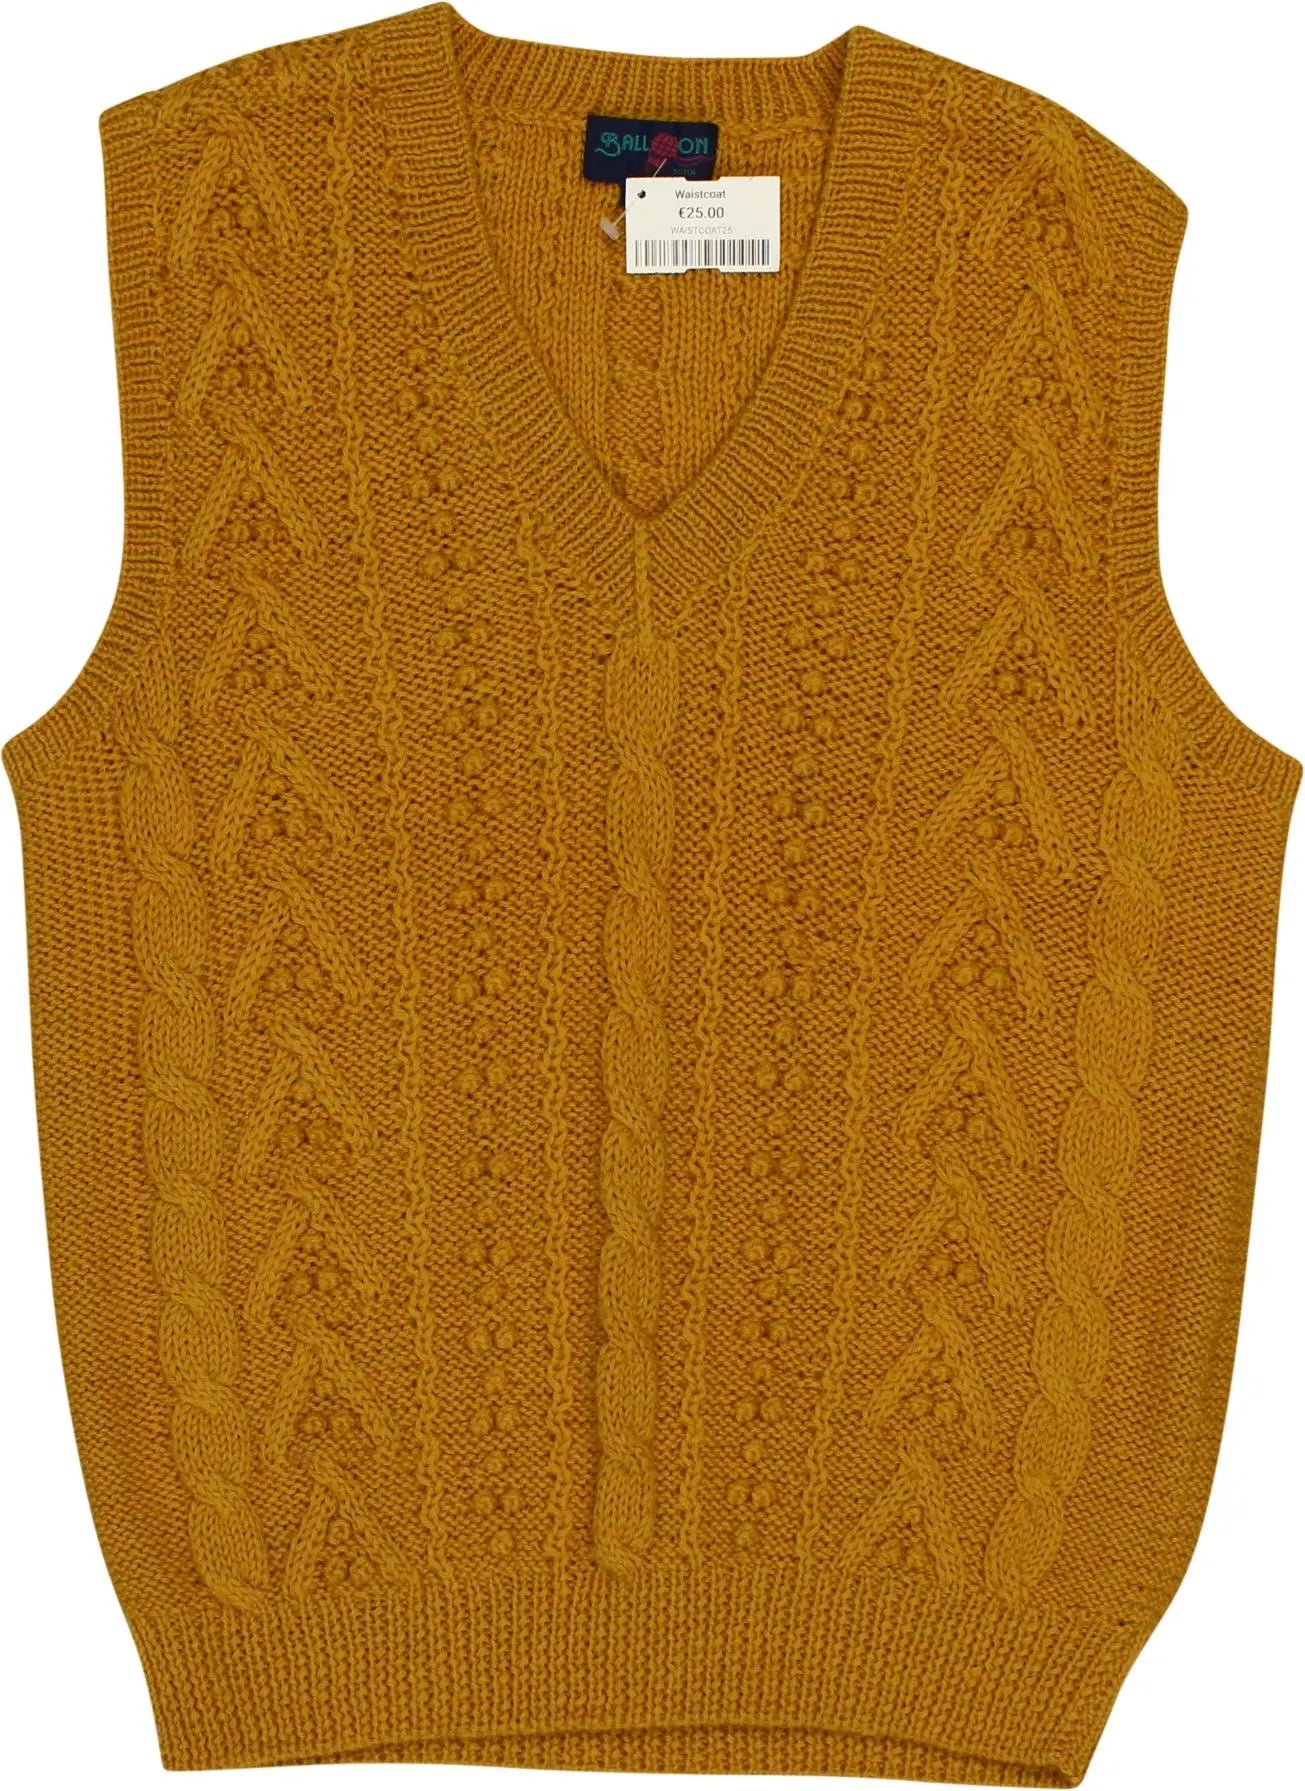 Ball On - Knitted Vest- ThriftTale.com - Vintage and second handclothing